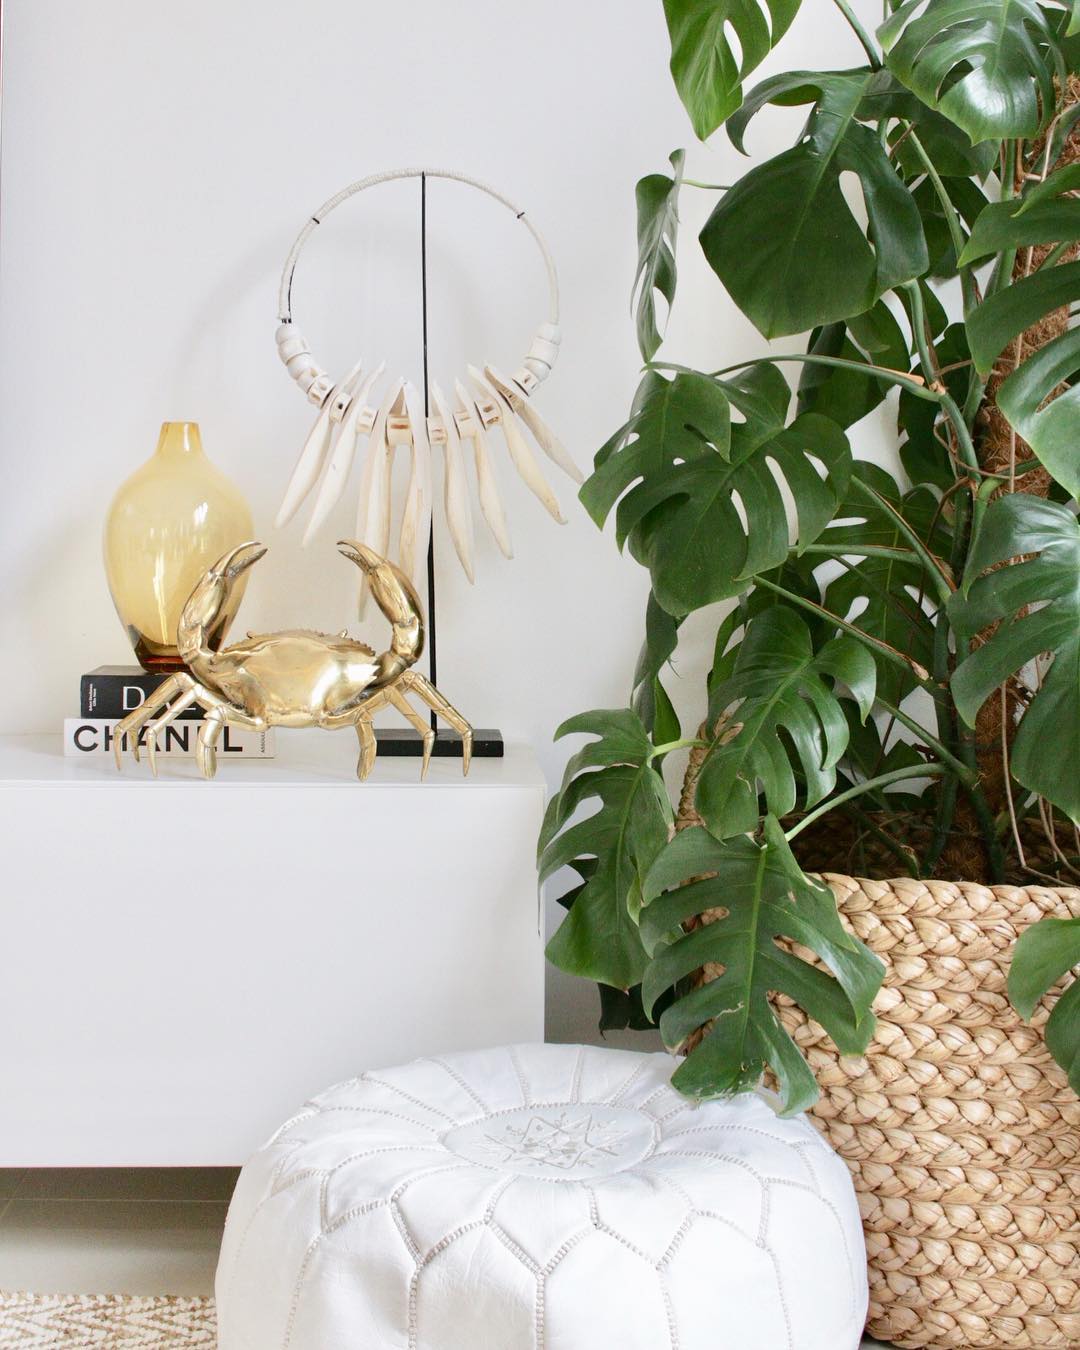 White and gold home decor pieces. Photo by Instagram user @projectpina